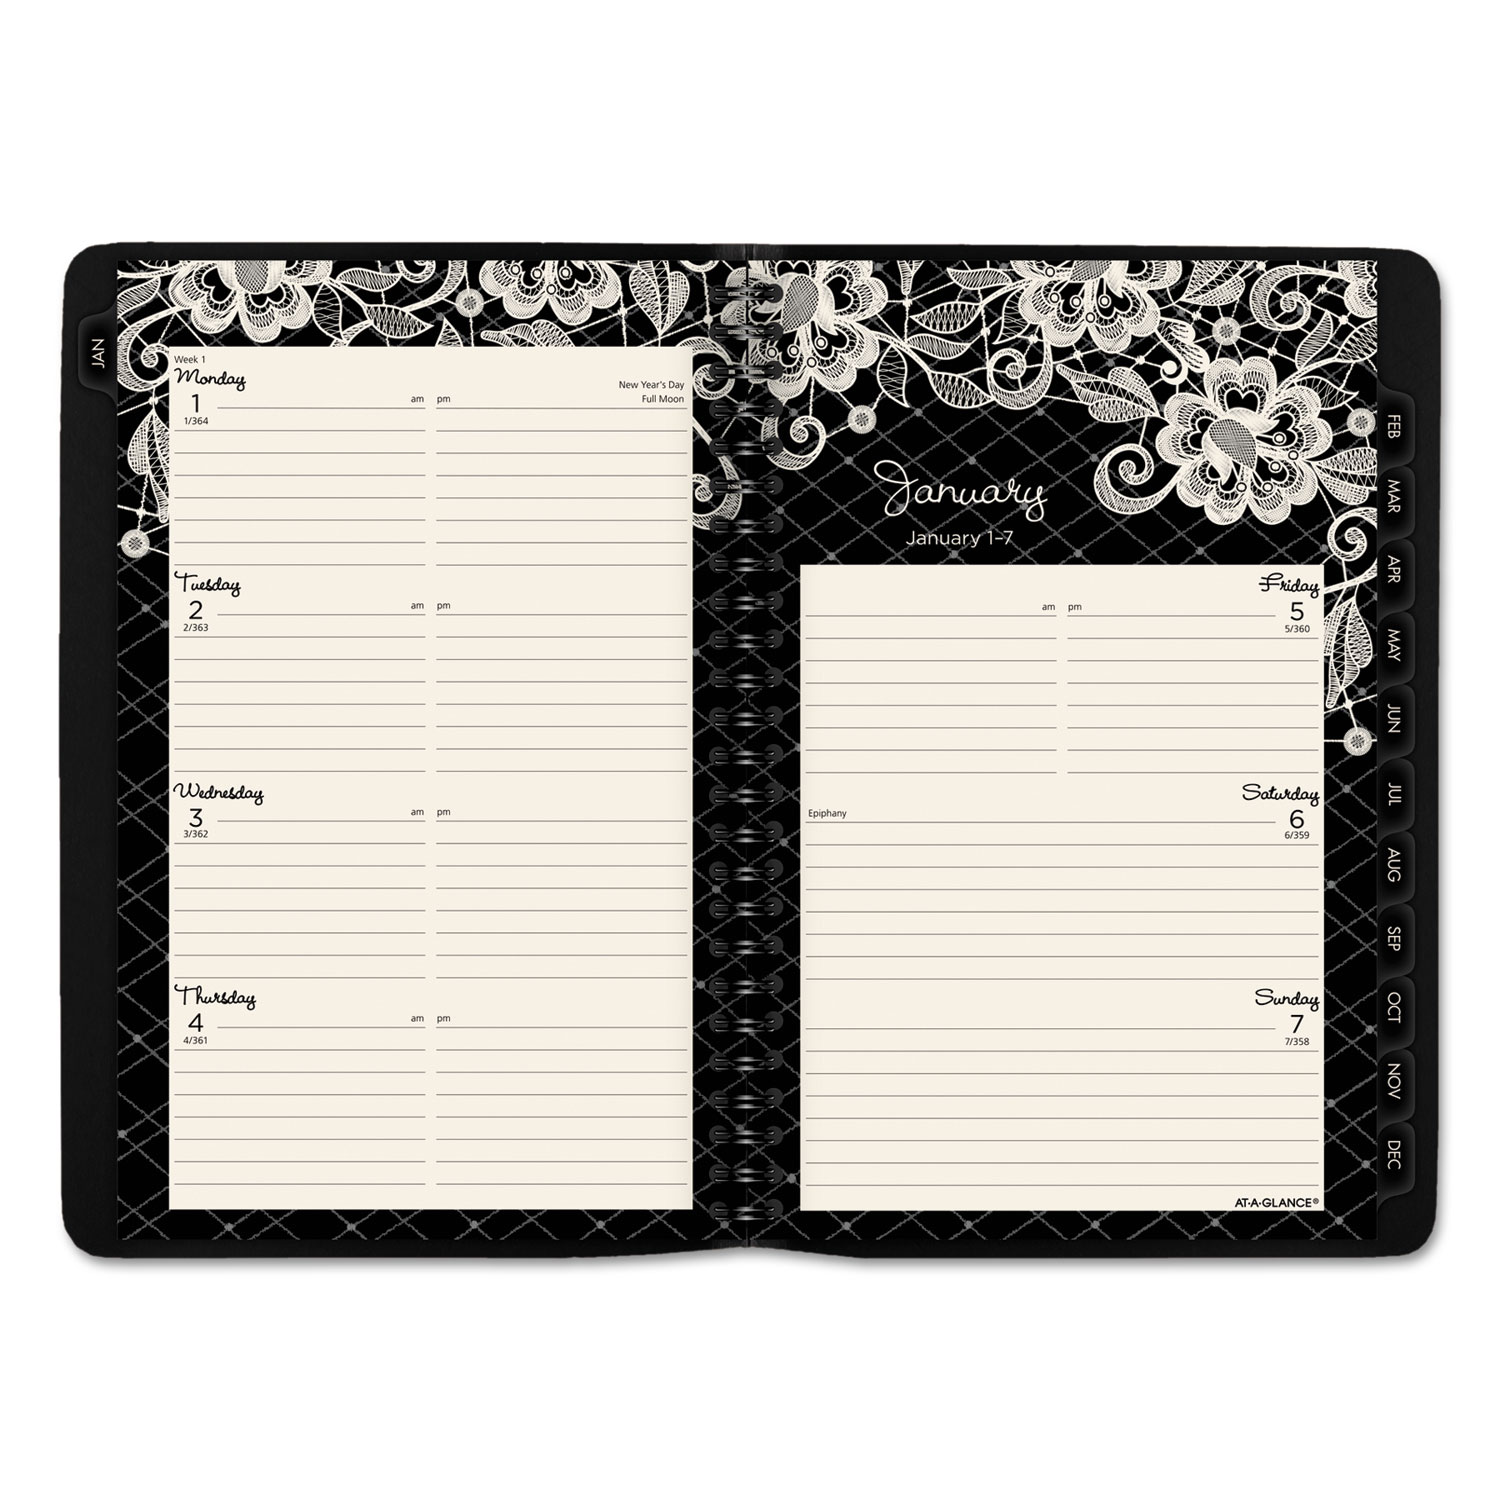 Lacey Desk Weekly/Monthly Planner, 6 1/4 x 9, 2018-2019